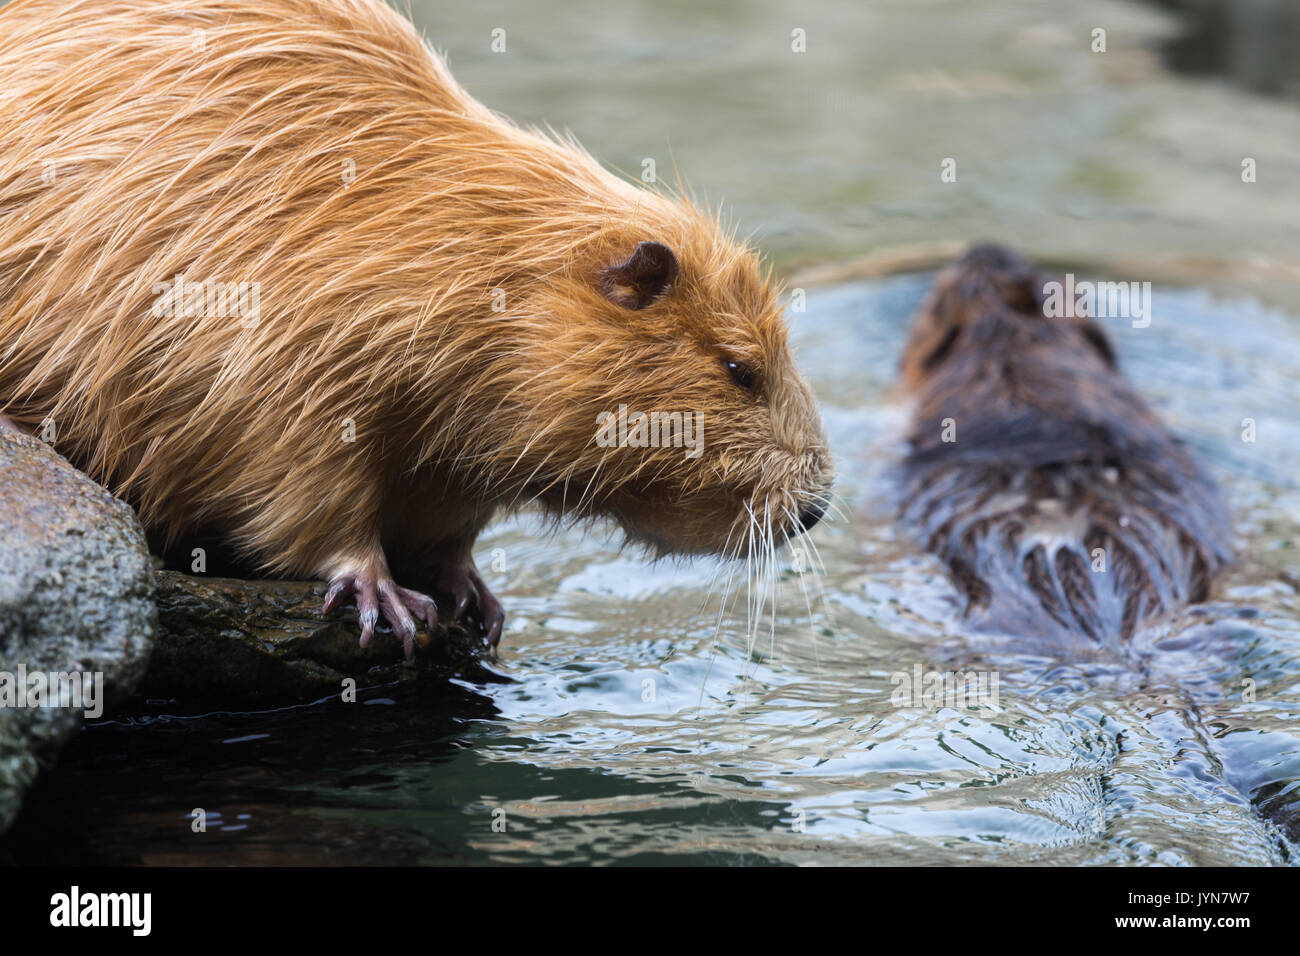 Pair of Coypu (Myocastor coypus), also called Nutria or Beaver rats), sitting and swimming Stock Photo